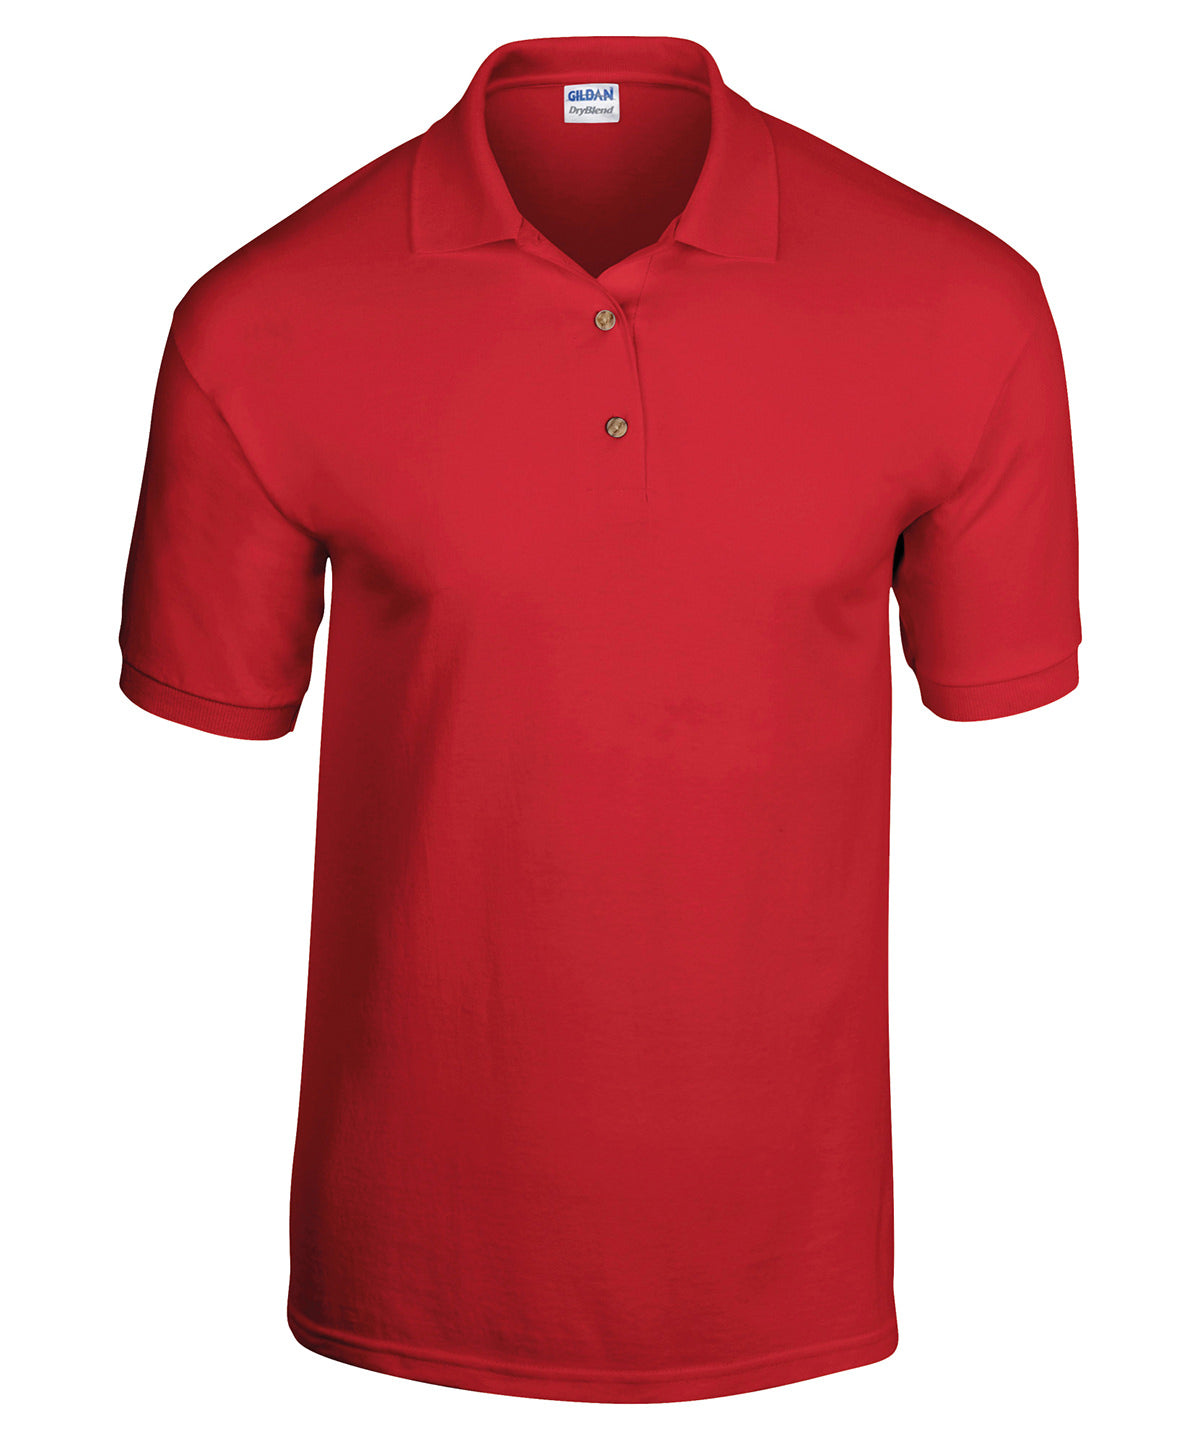 Personalised Polo Shirts - Mid Blue Gildan DryBlend® Jersey knit polo